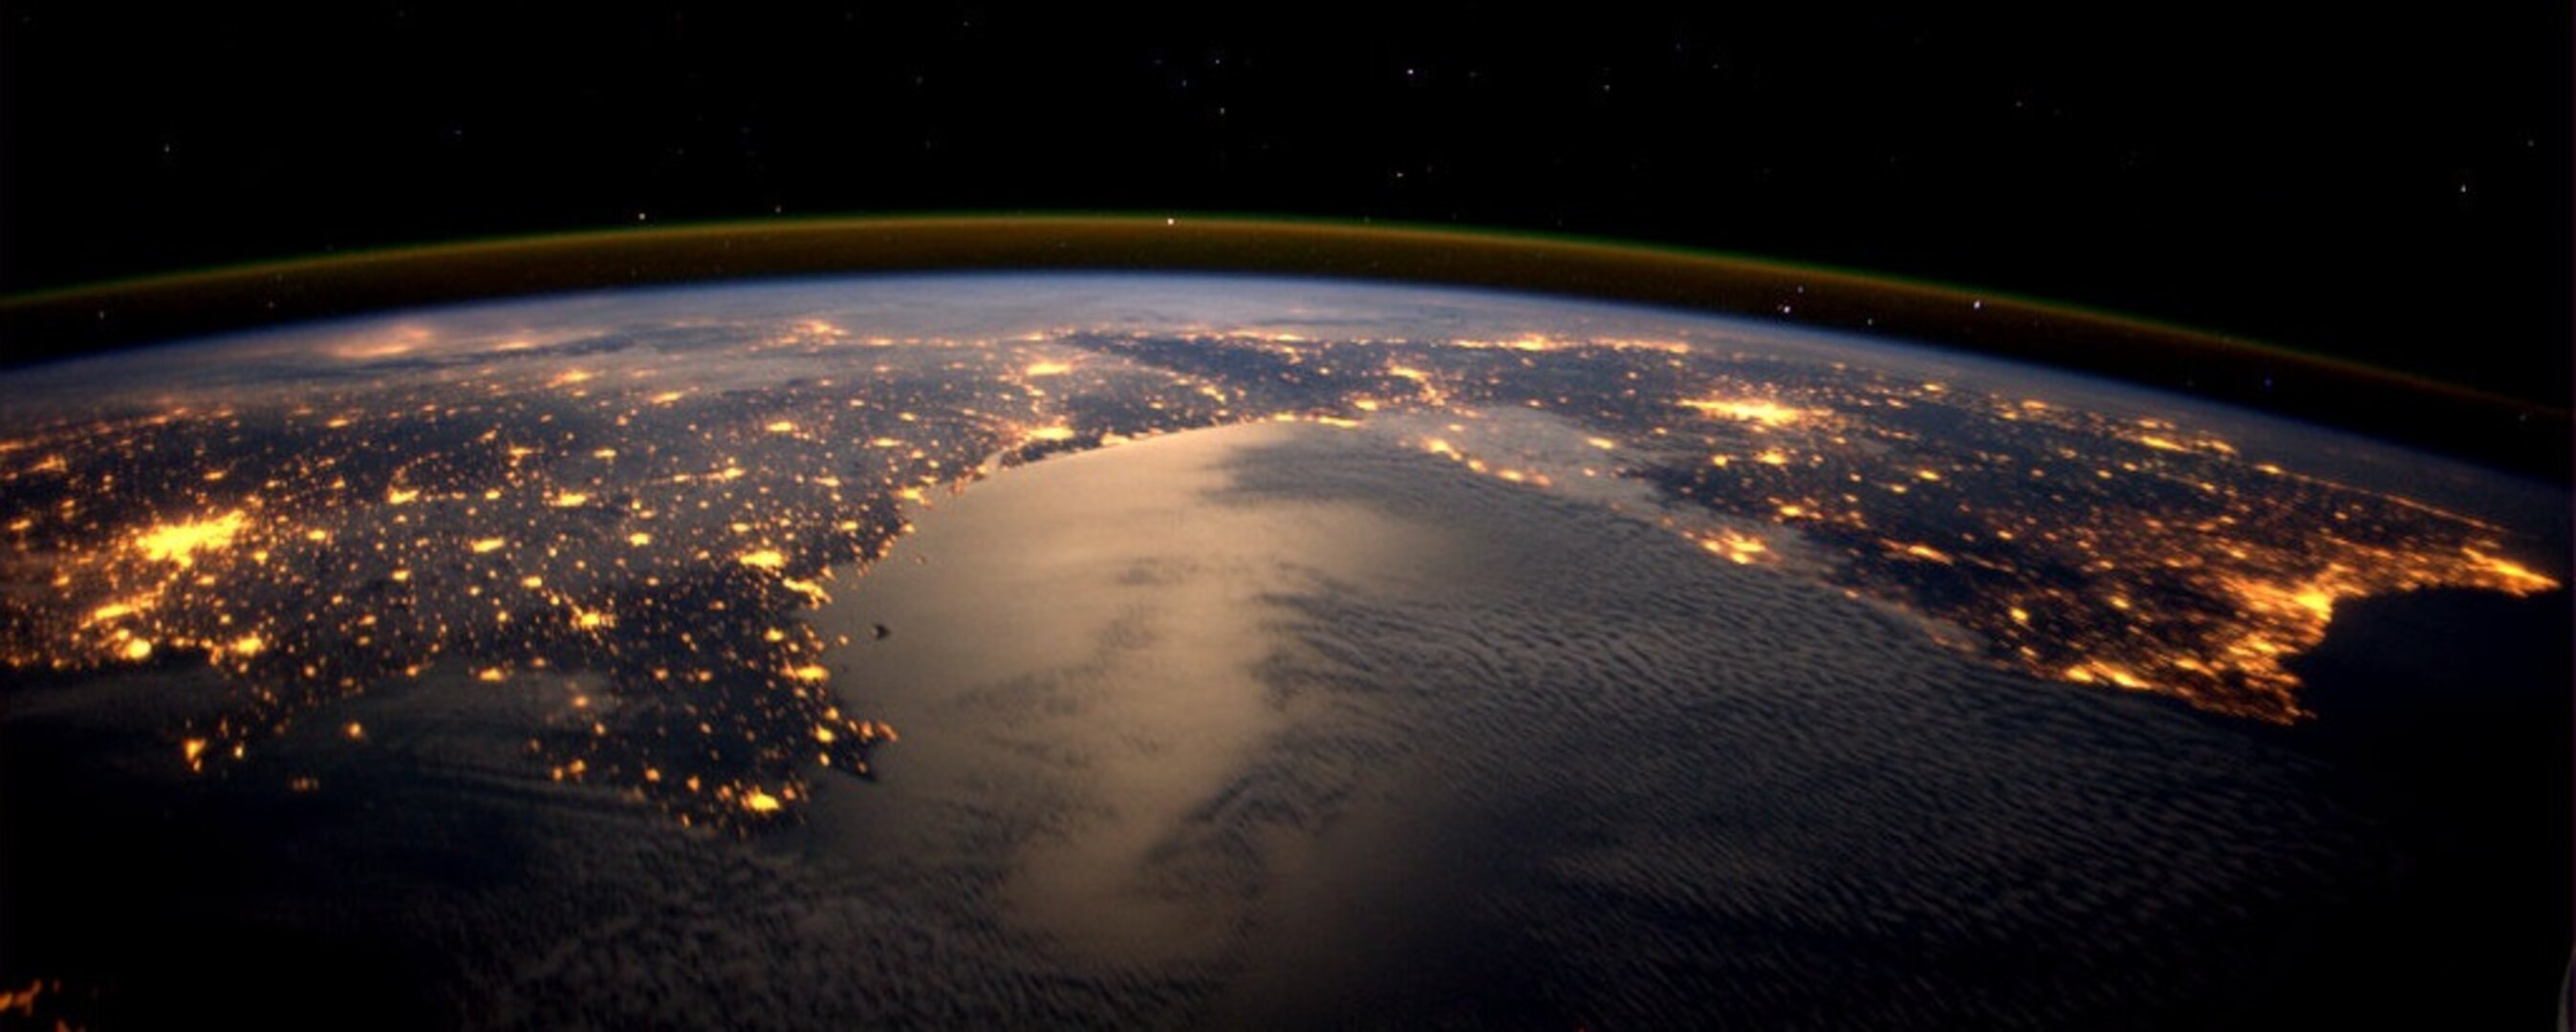 Europe seen by ESA astronaut André Kuipers onboard the ISS